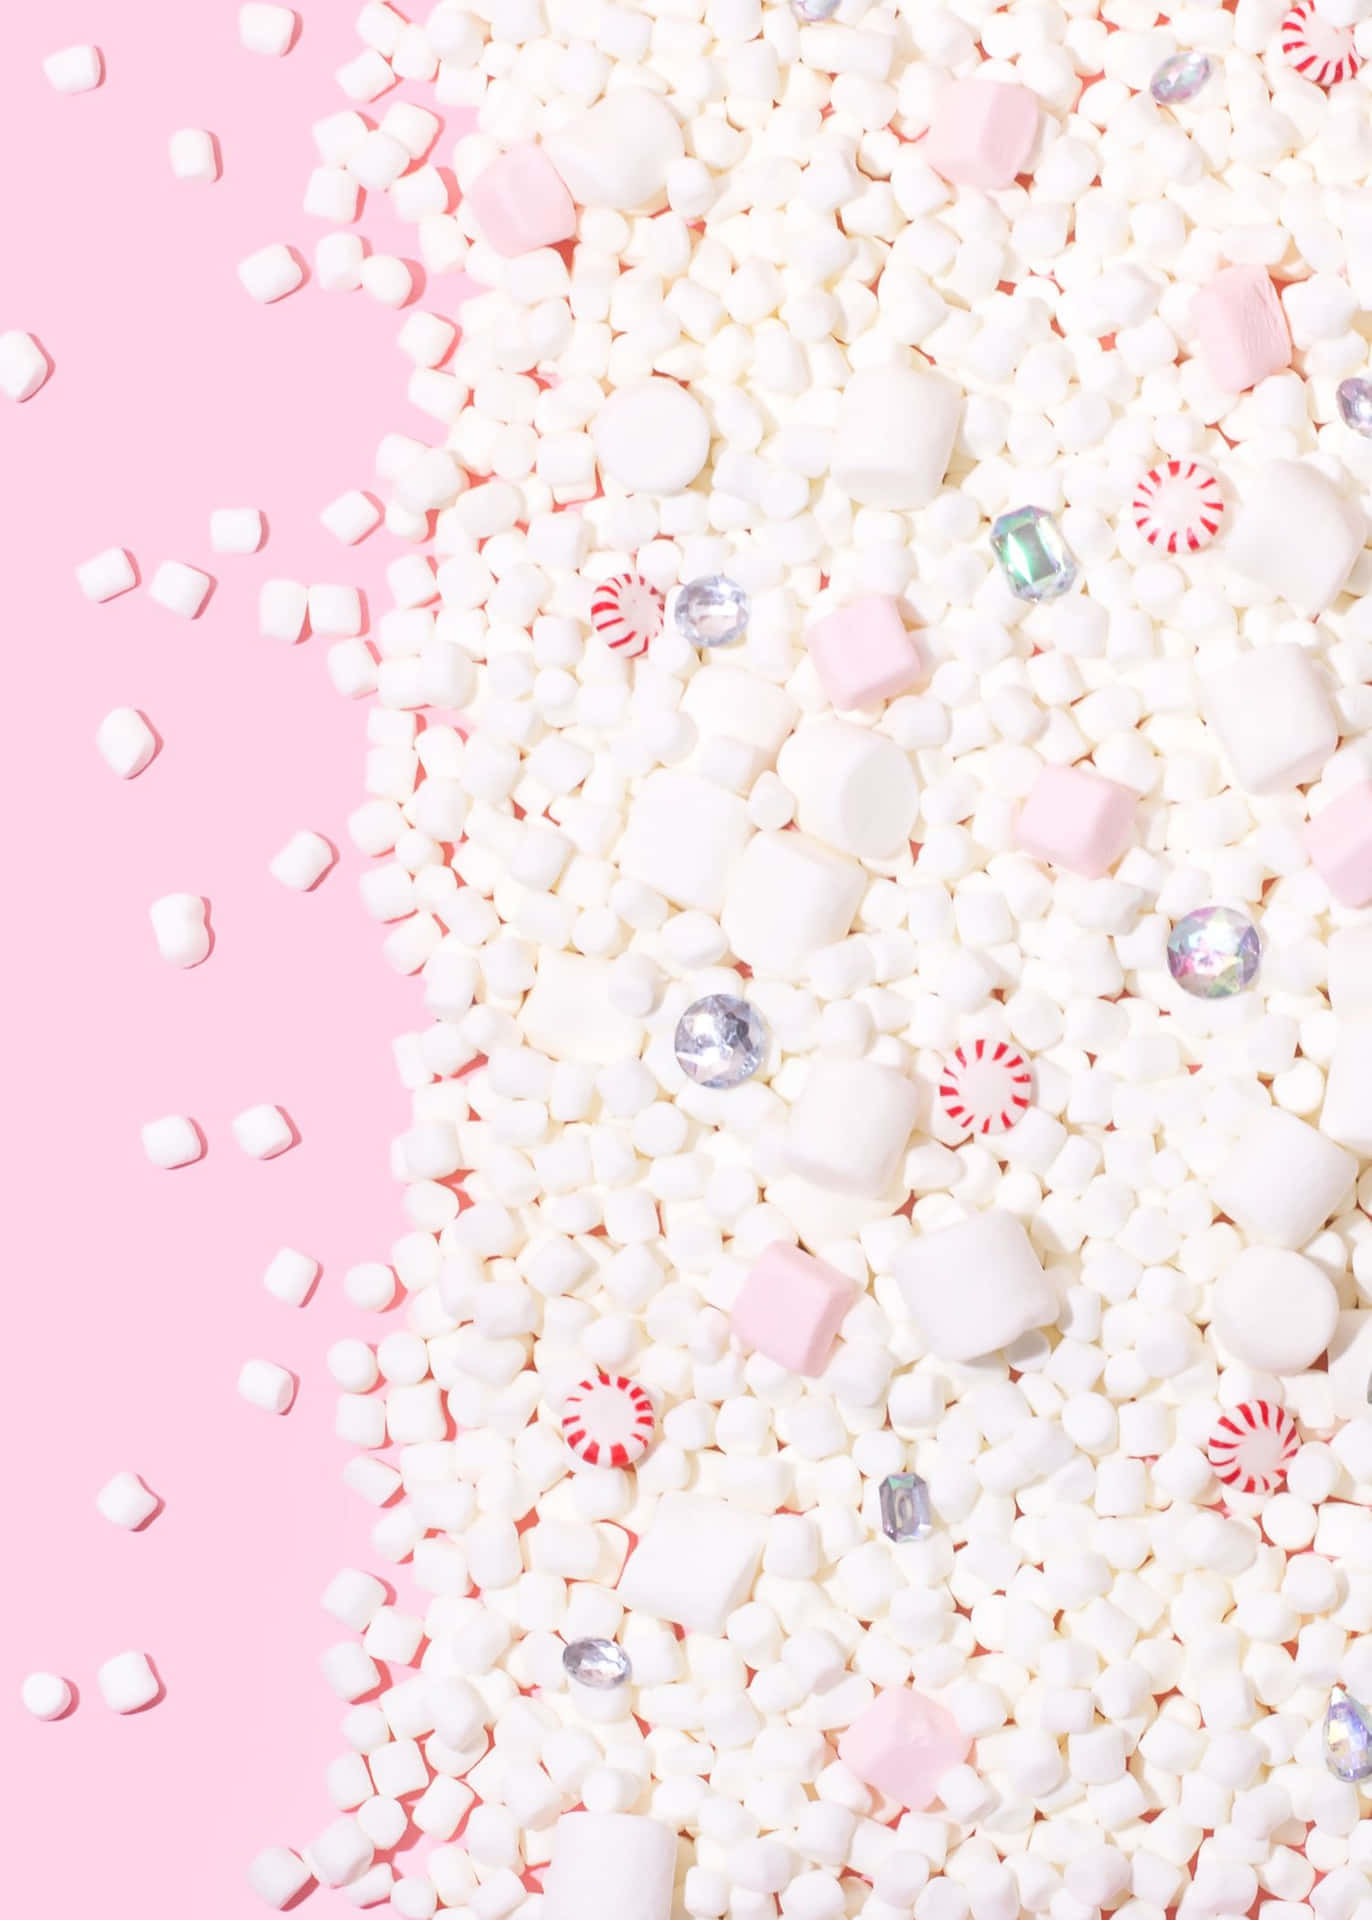 Get Ready For The Latest Marshmallow Phone Wallpaper